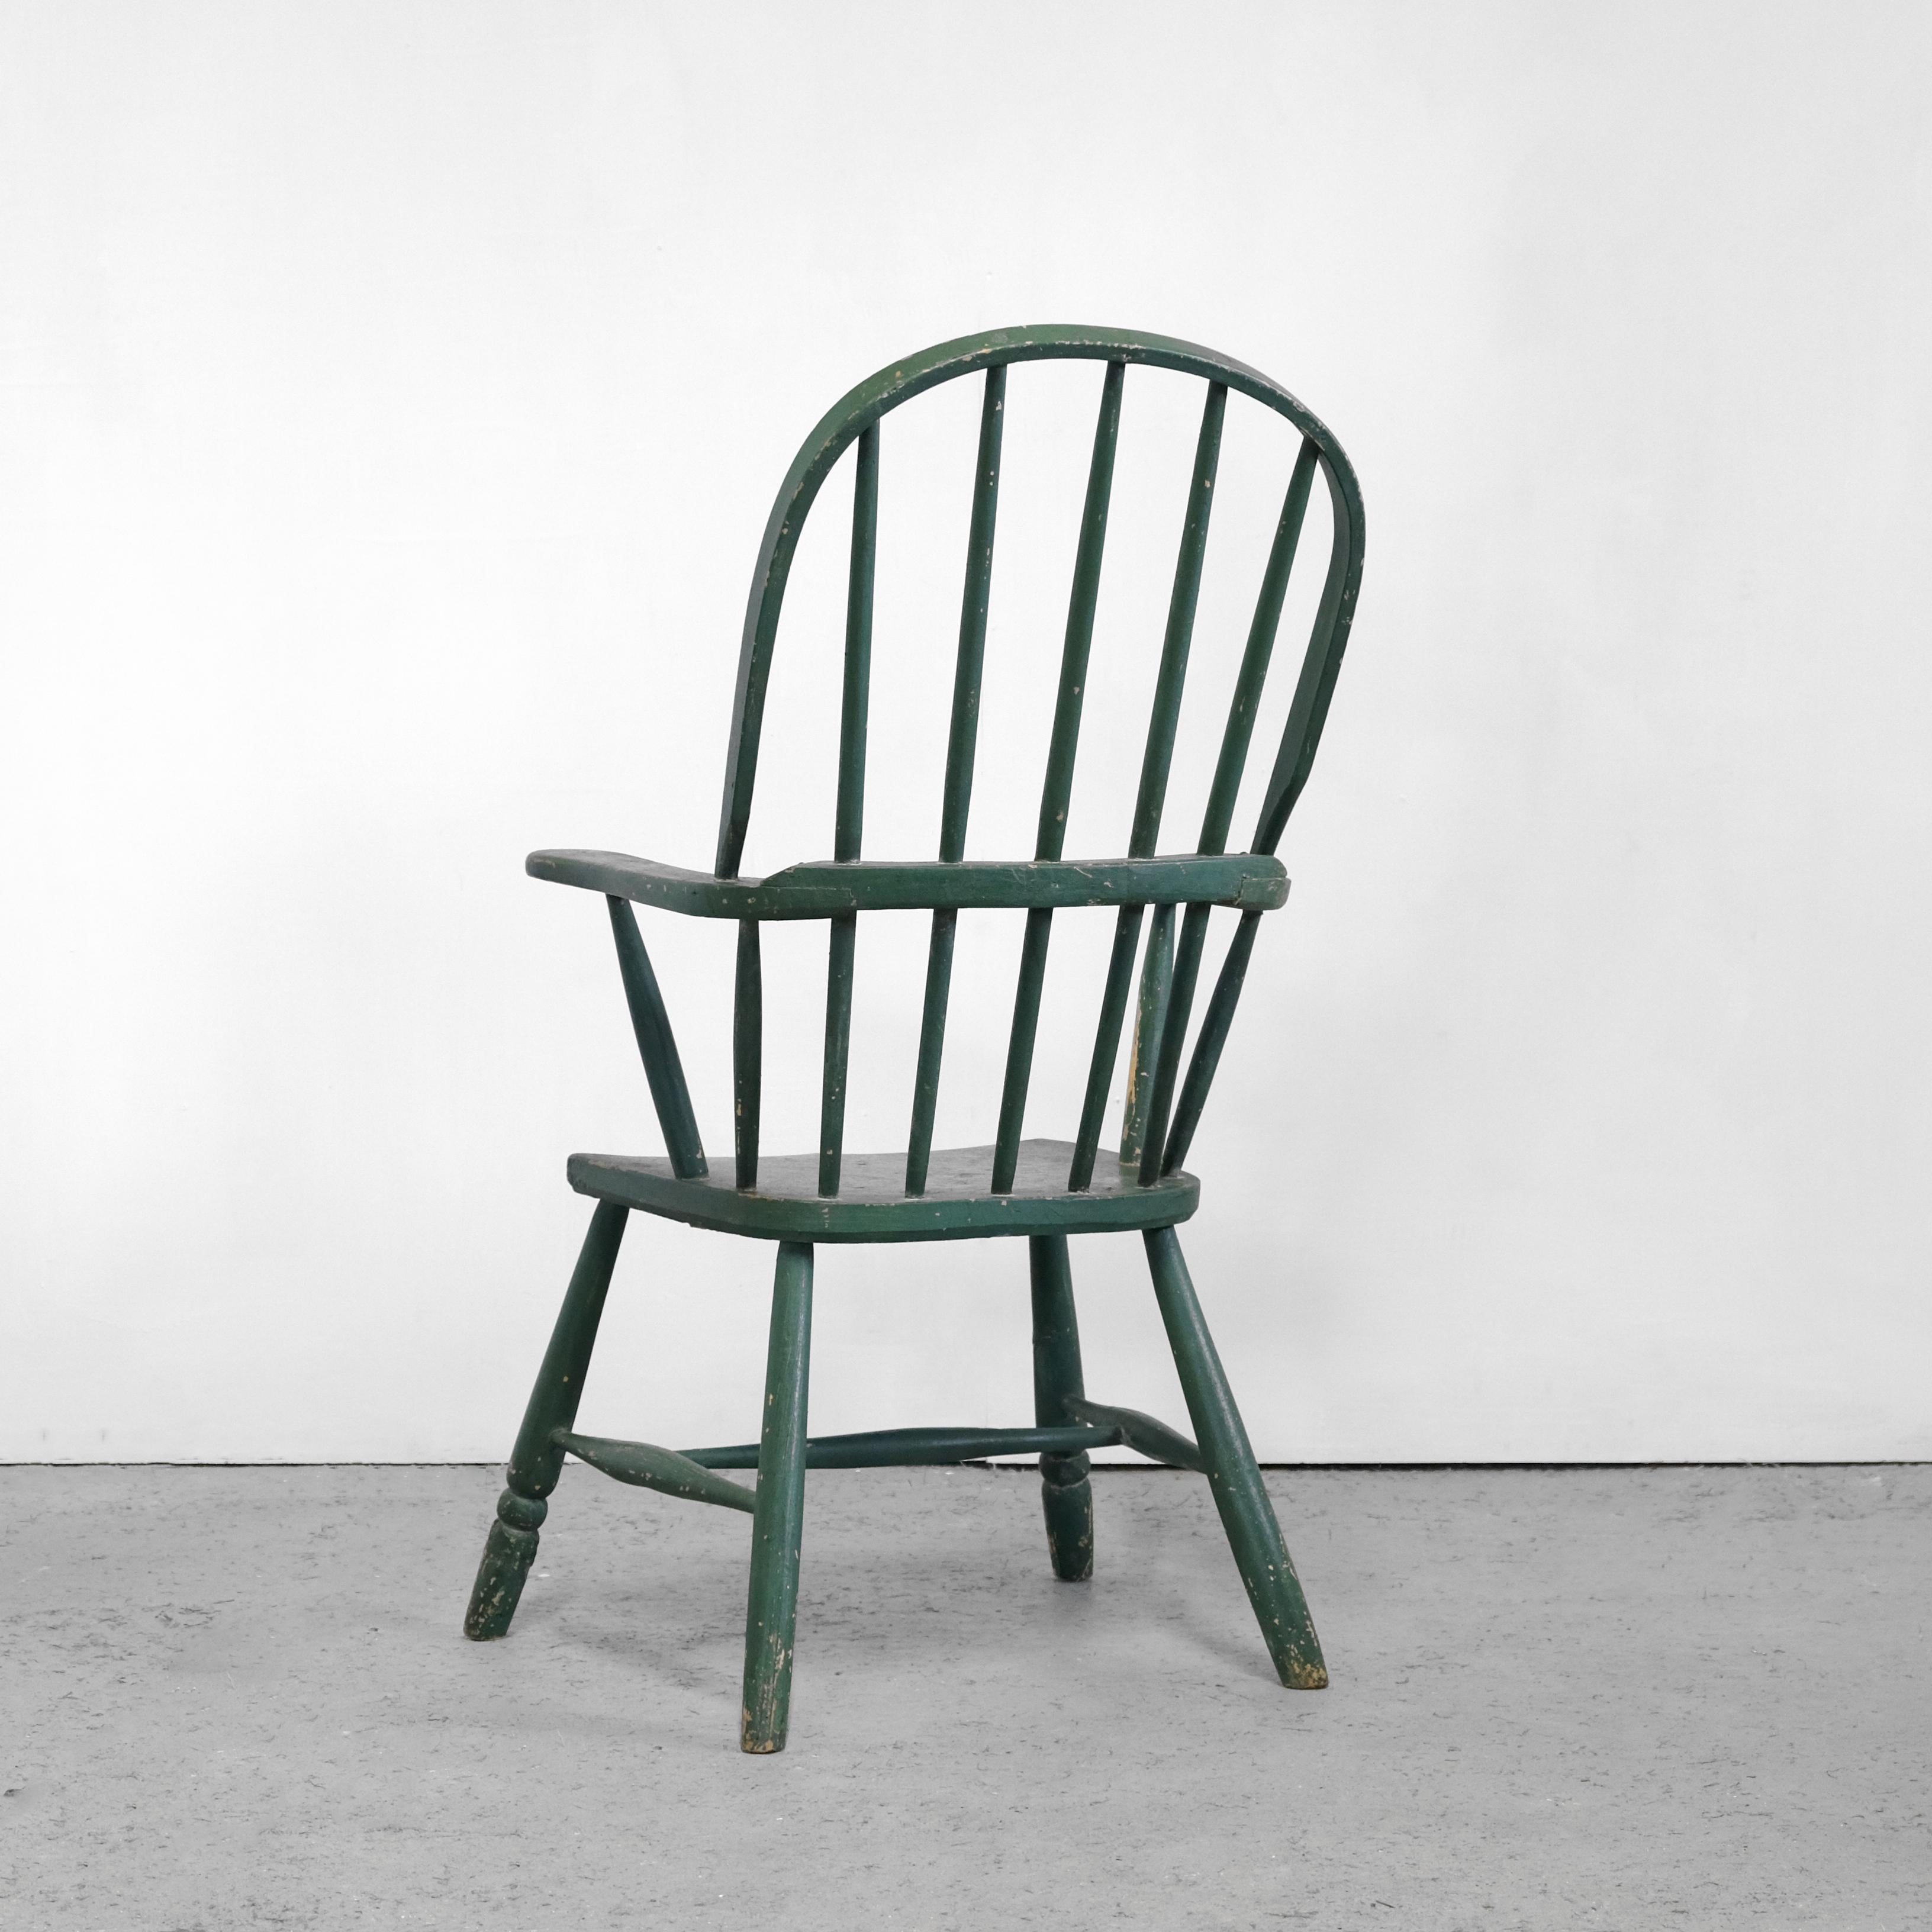 Hand-Crafted Early 19th Century Painted English West Country Windsor Stick Chair in Green